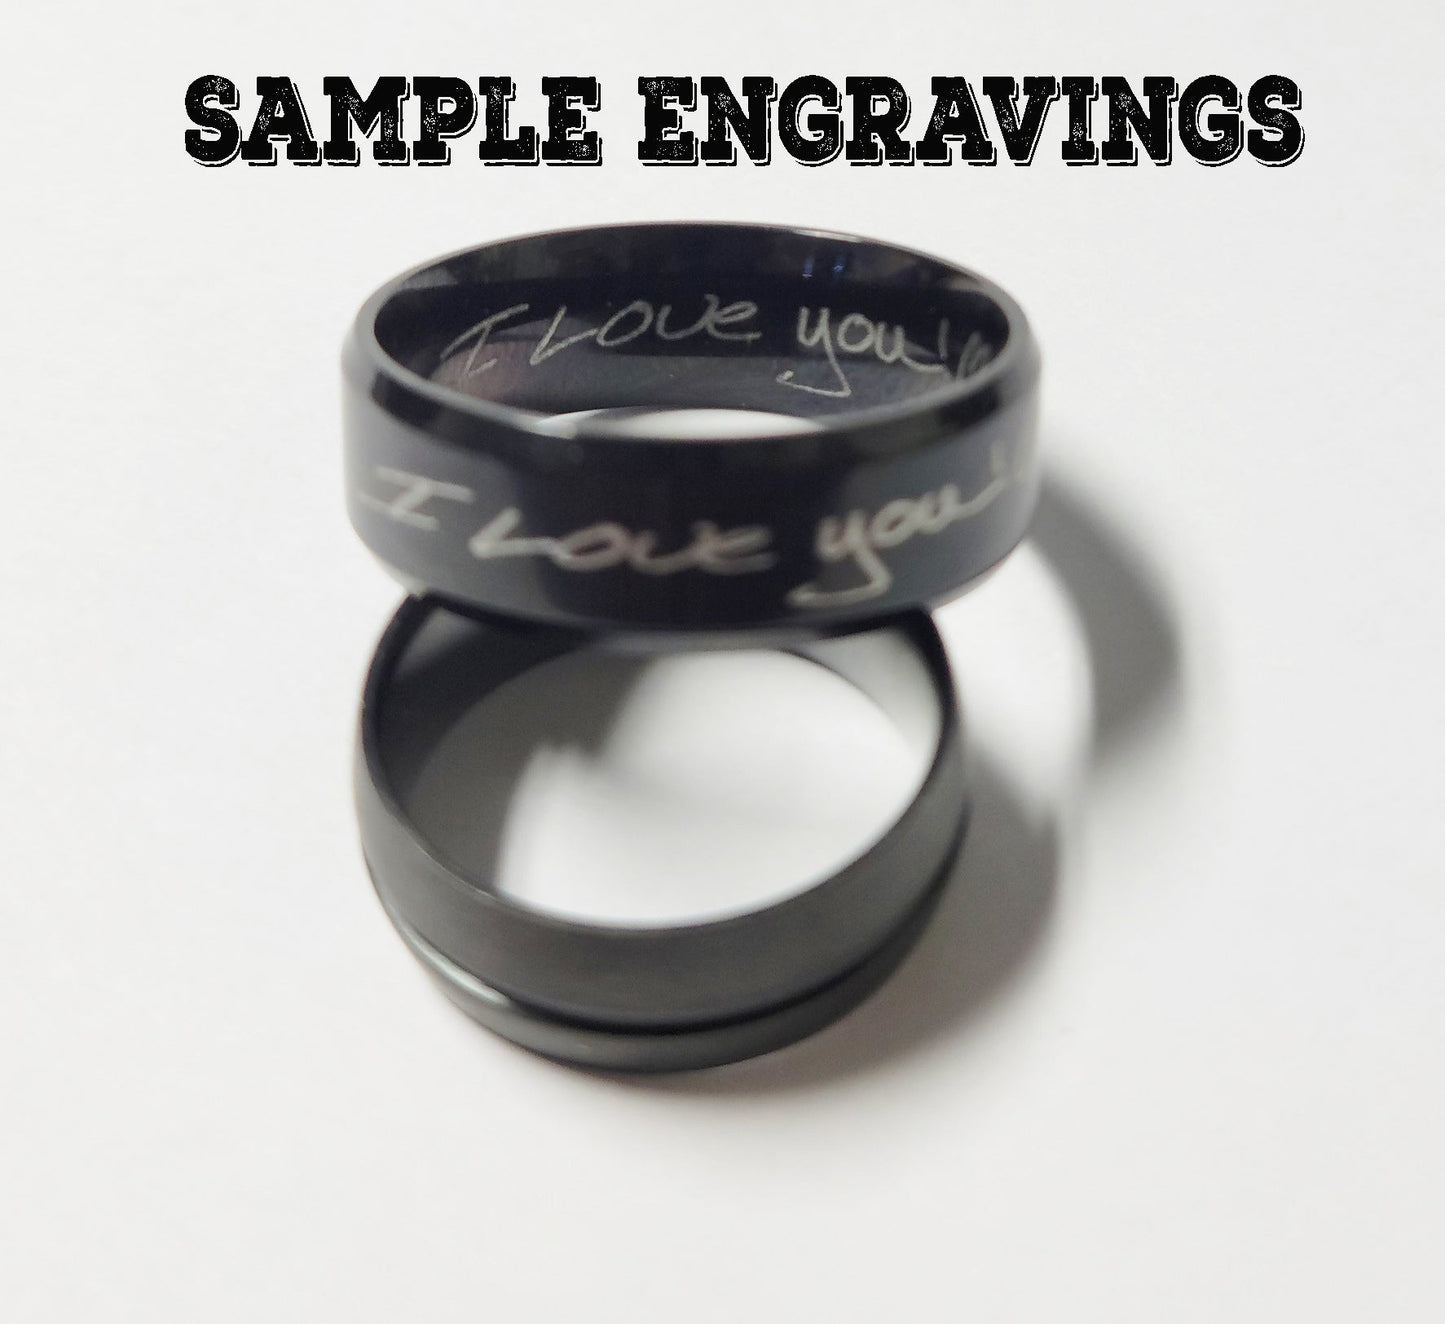 Think Engraved Promise Ring Custom Engraved Man's Blue Promise Ring - Personalized Promise Ring For Guys